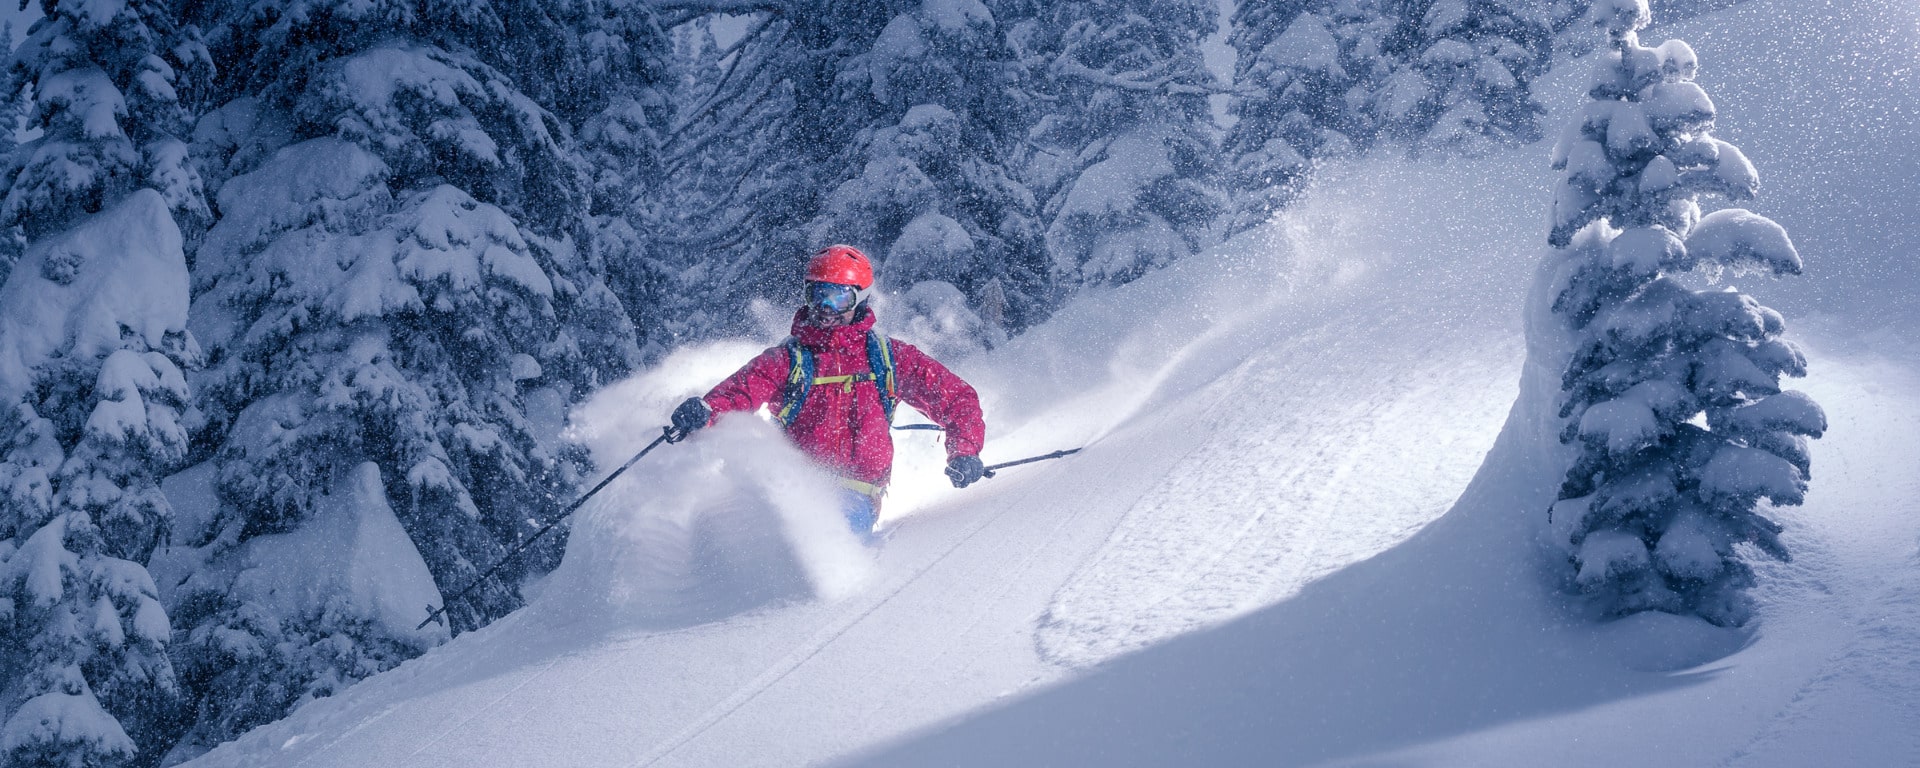 Best Powder Skis - Feature Image